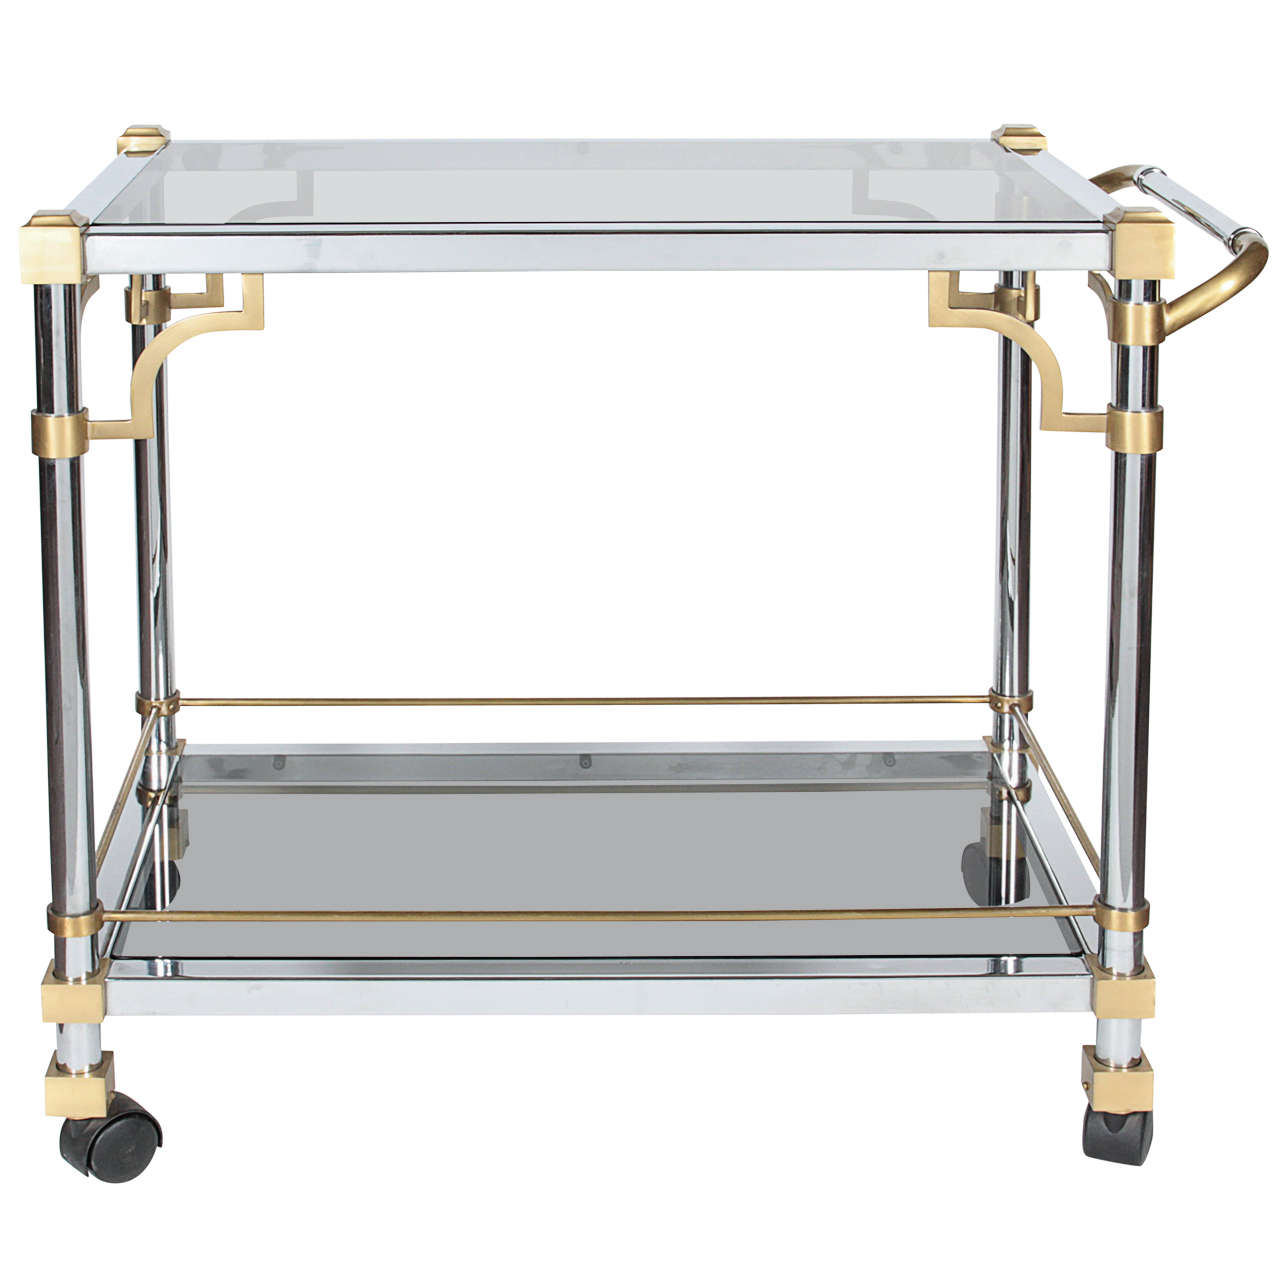 A Minimalist, mid century modern two tone bar cart, attributed to Maison Jansen. The frame in gilt bronze and polished nickeled iron is both structural and highly decorative and is influenced by the Anglo-Japanese style. It features a heavyweight